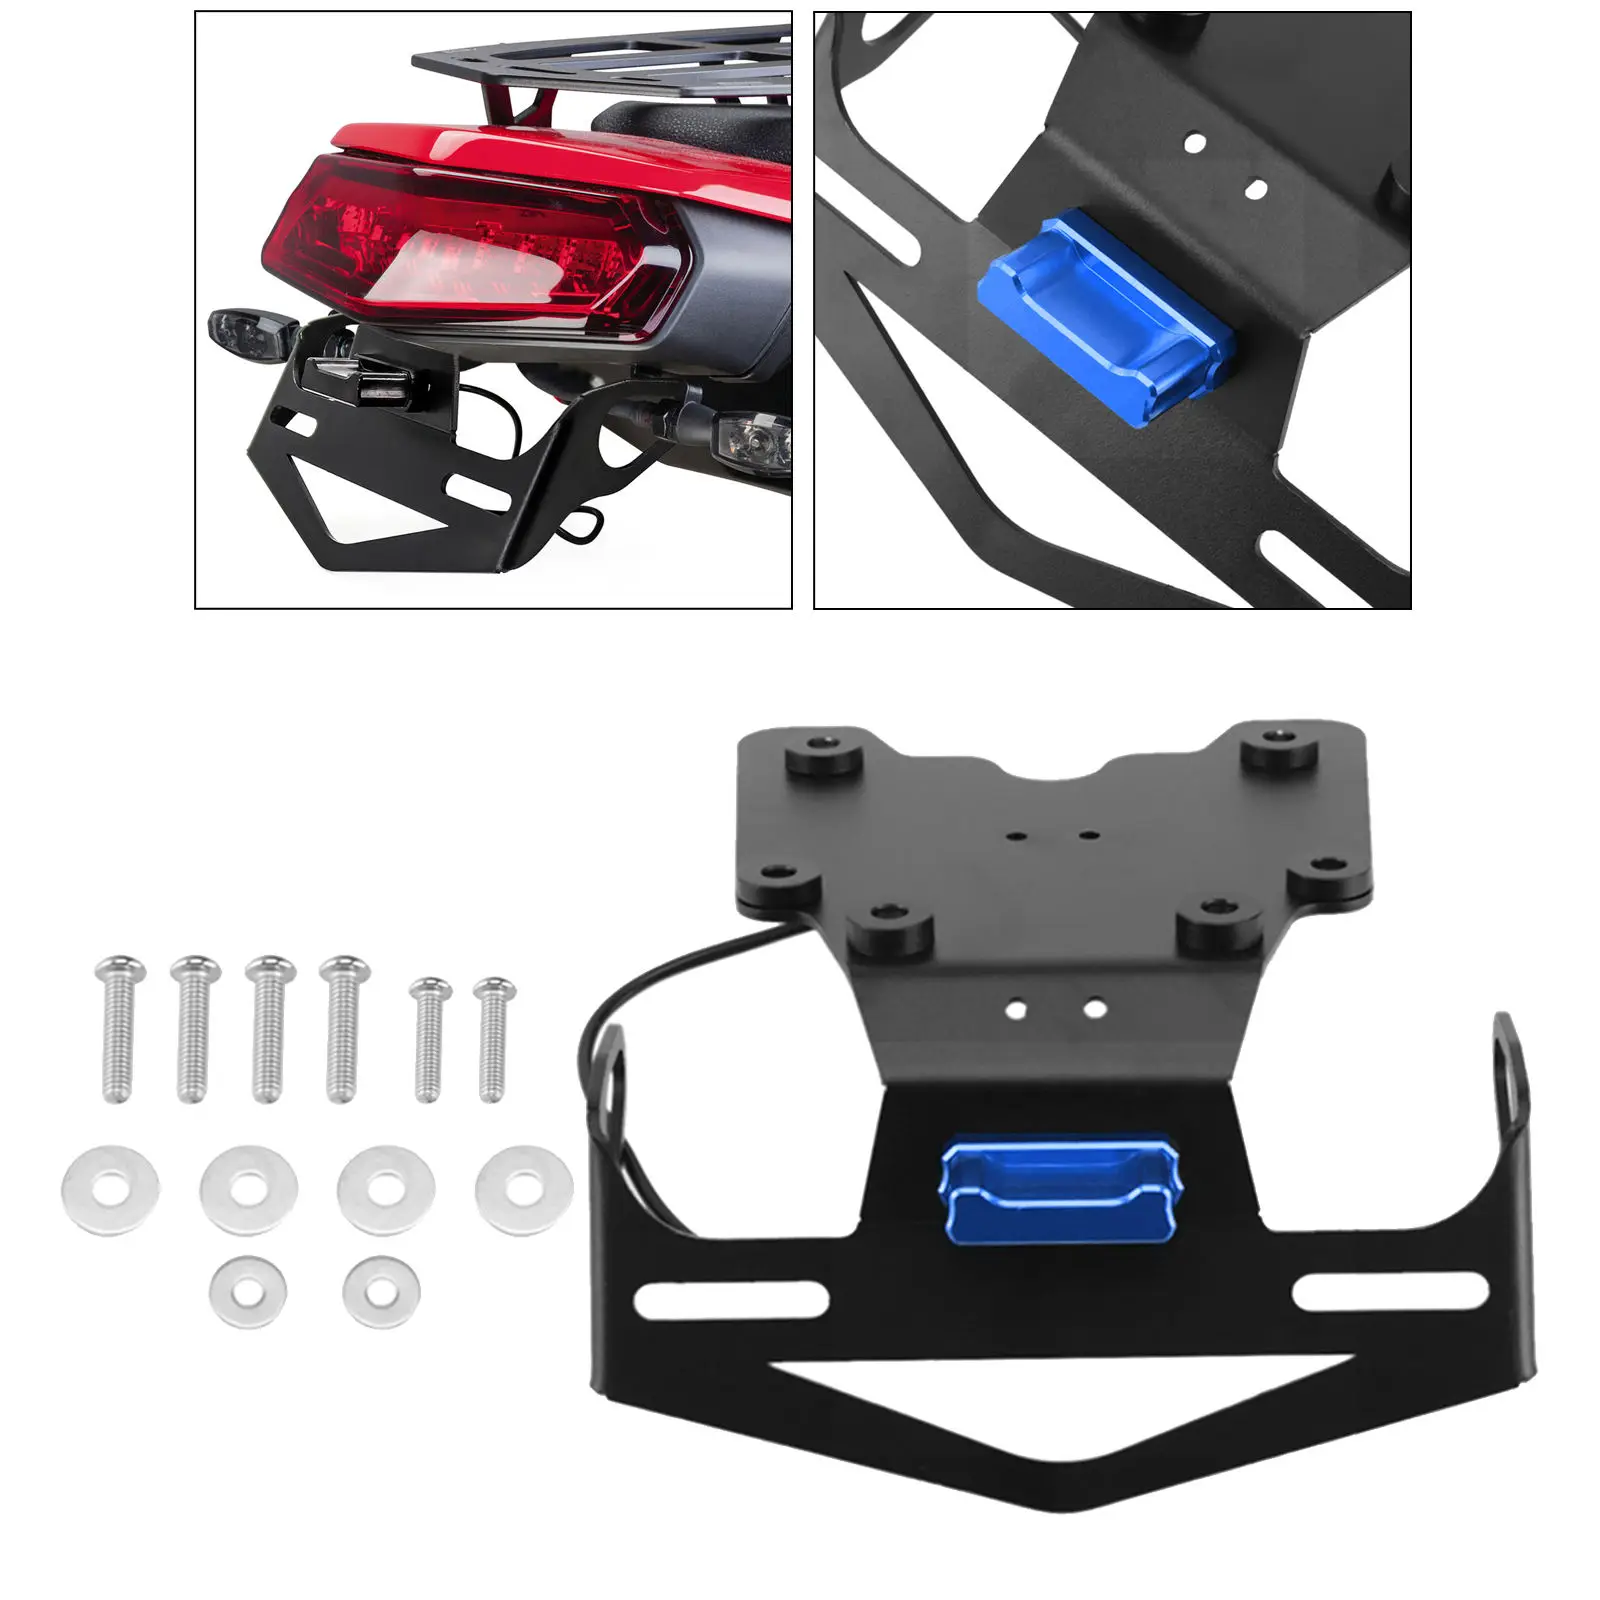 Motorbike Motorcycle Rear License Plate Holder Mount Compatible with Yamaha Tenere 700 2019 2020 2021